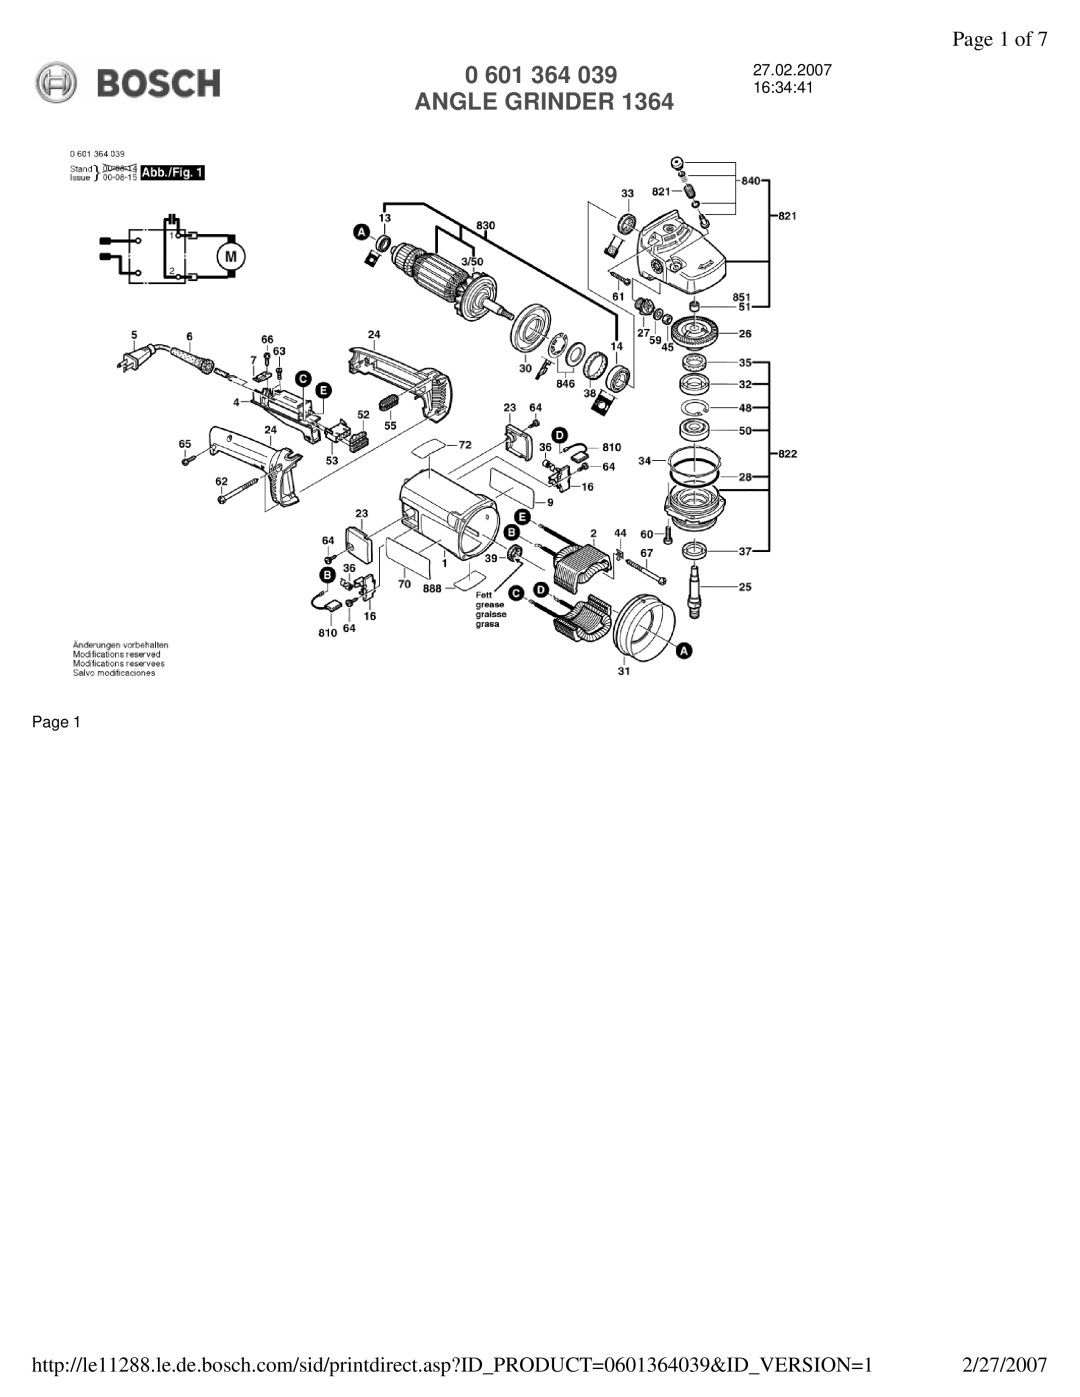 Bosch Appliances 1364 manual Page 1 of, 0 601 364 039 ANGLE GRINDER 